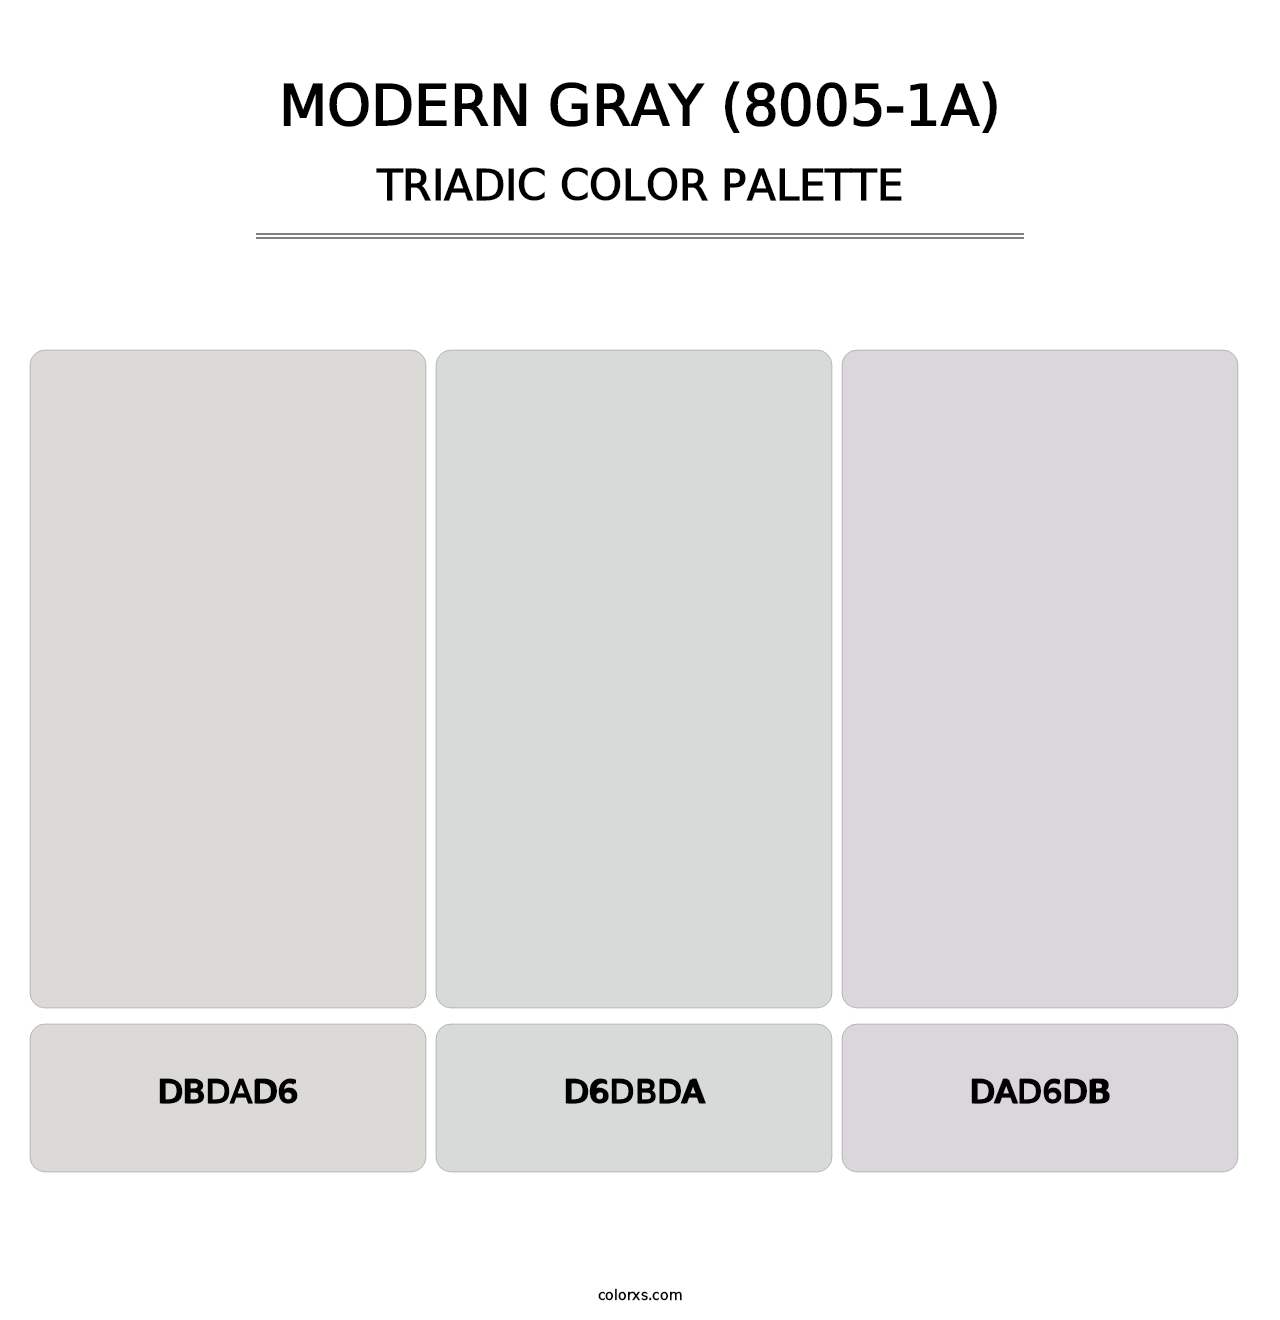 Modern Gray (8005-1A) - Triadic Color Palette